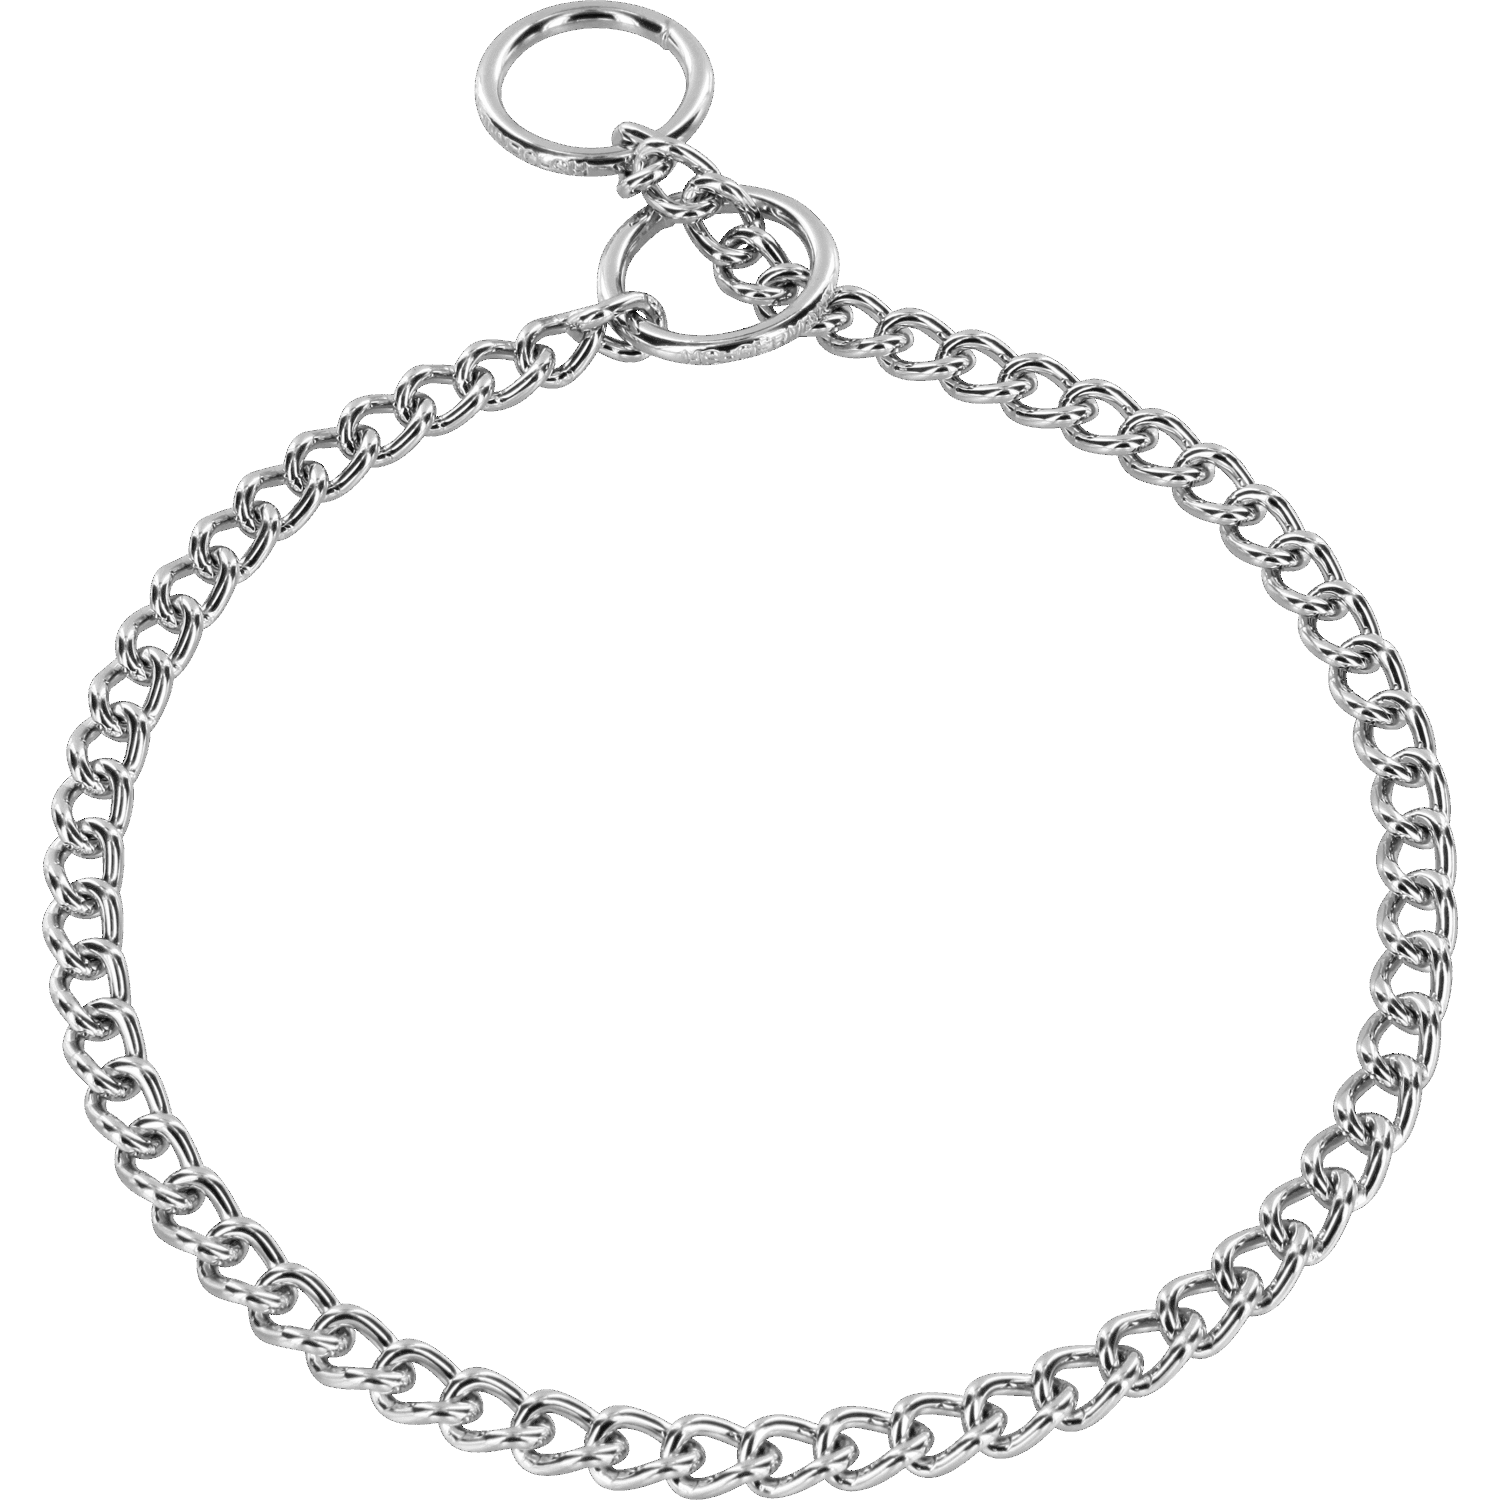 Narrow Round Chain Link Collar (Steel Chrome-Plated) - 3mm